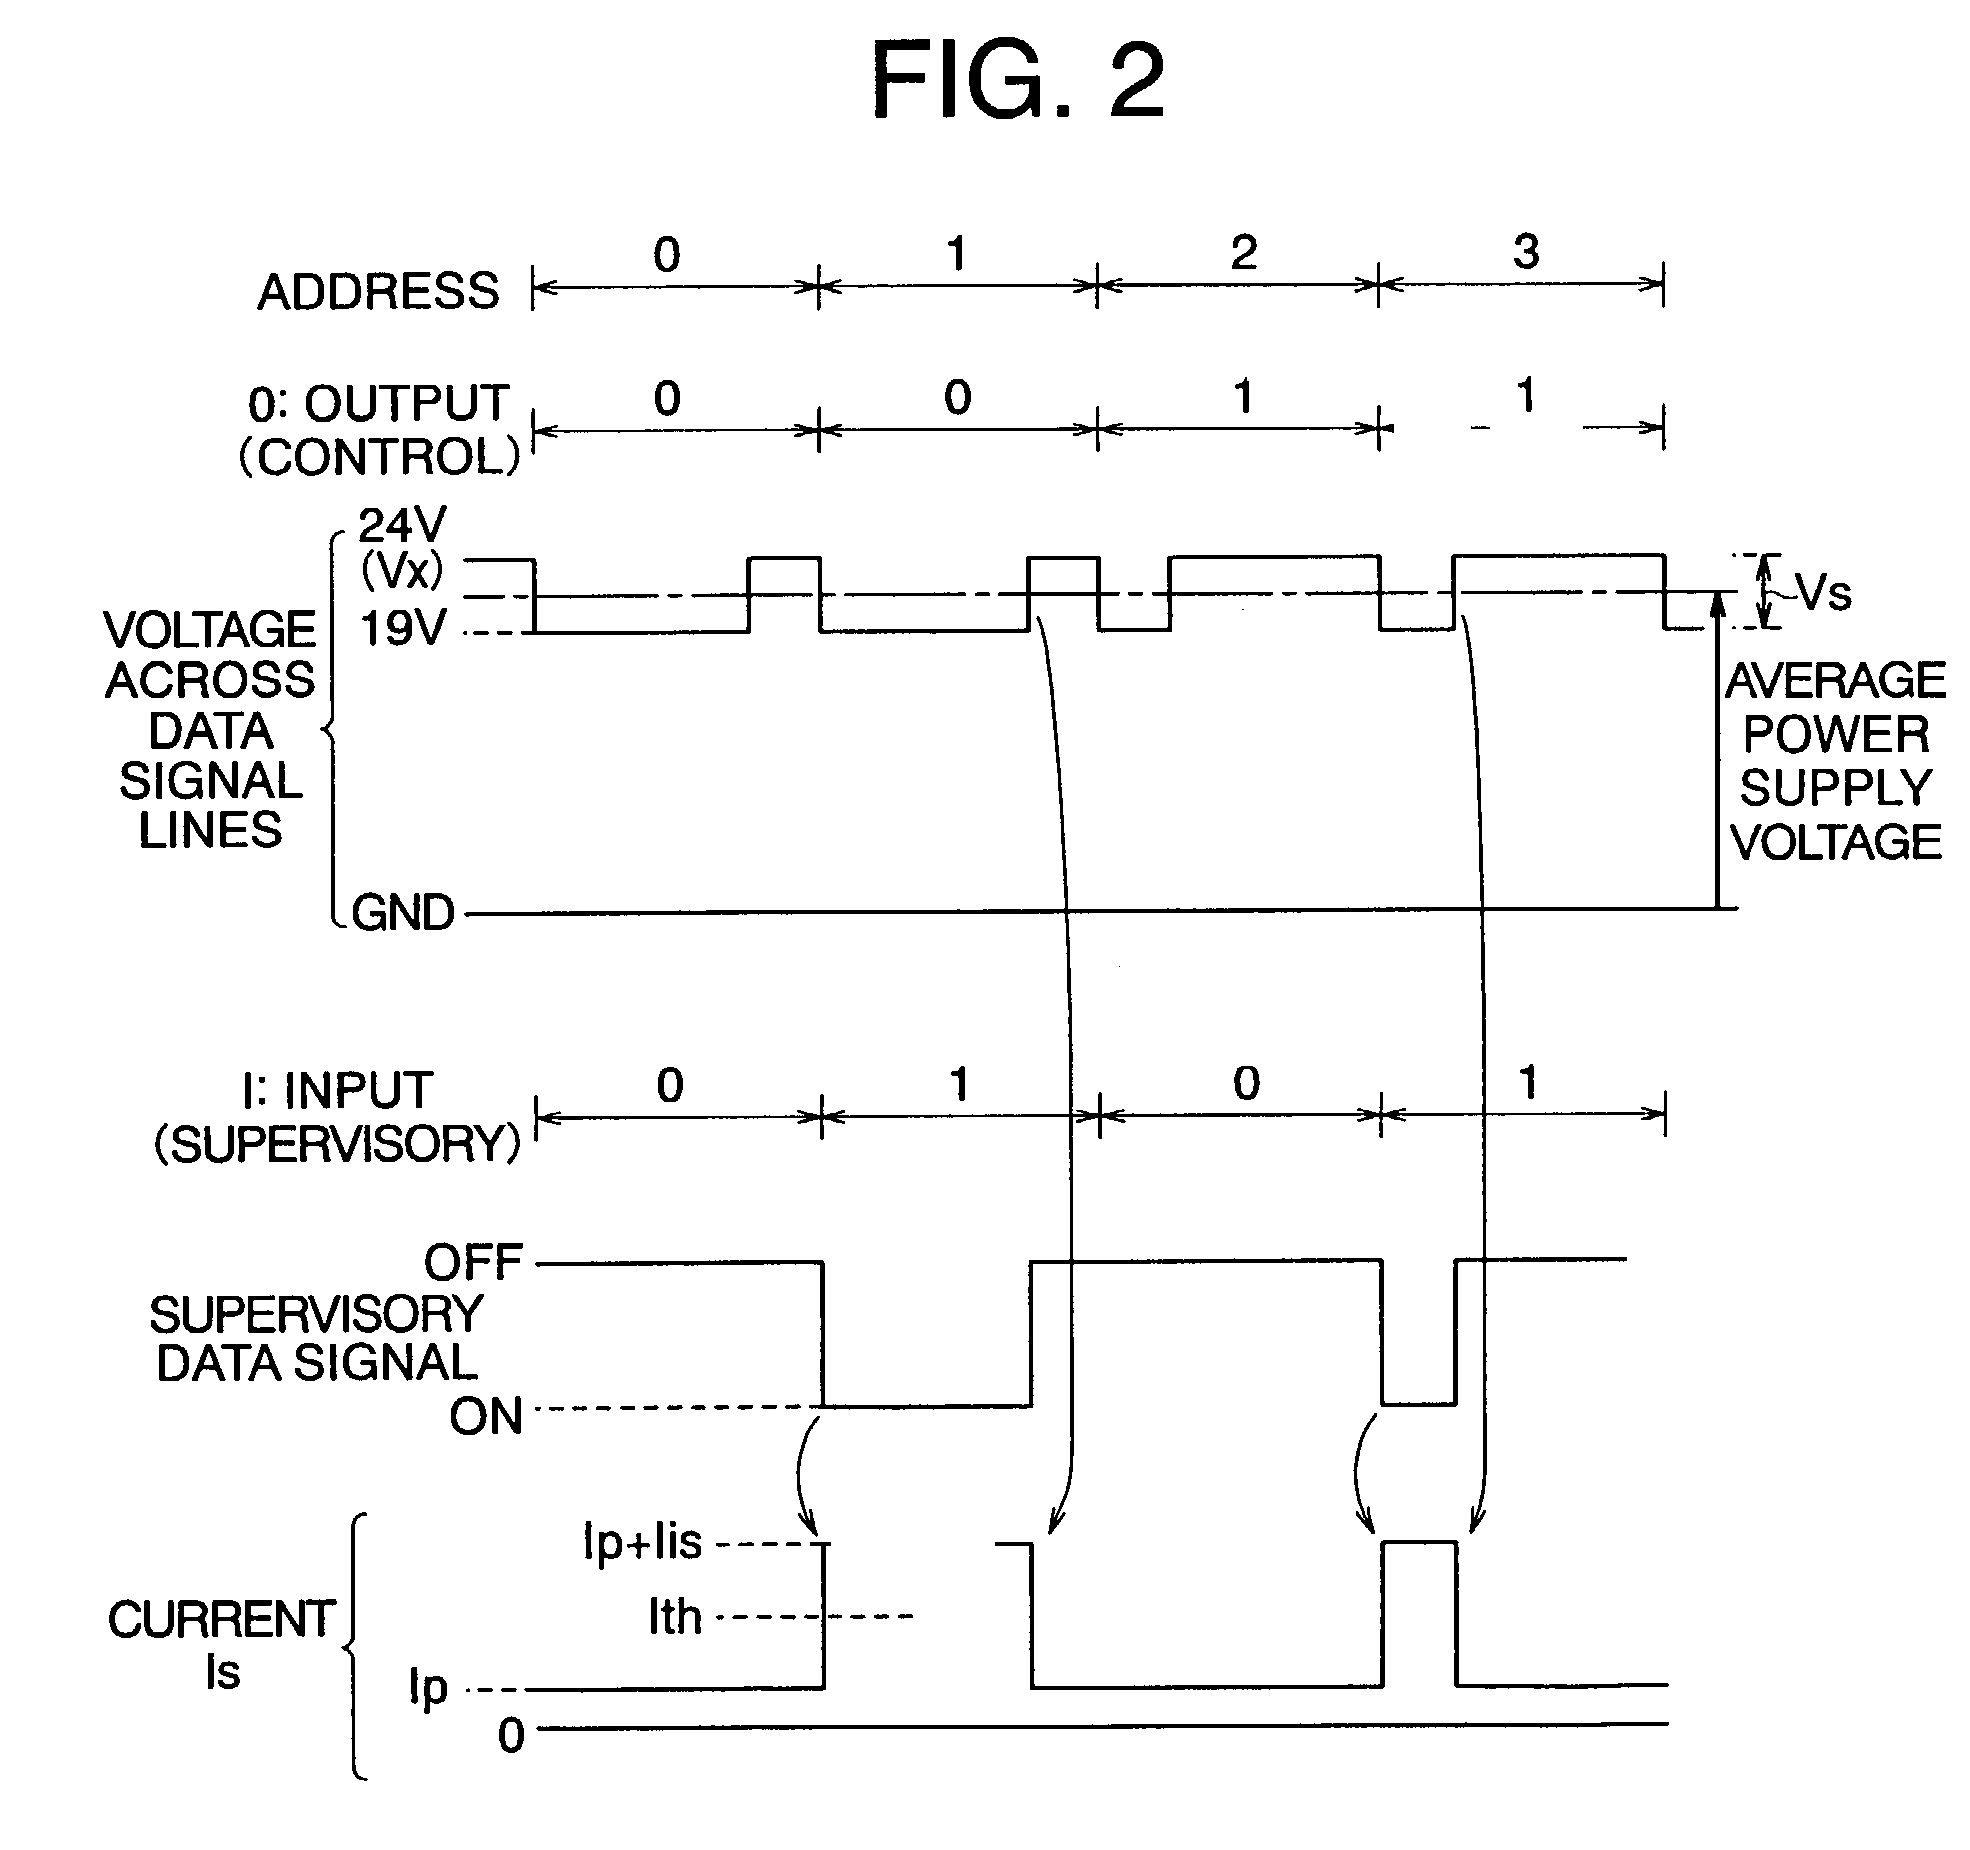 Control and supervisory signal transmission system for changing a duty factor of a control signal